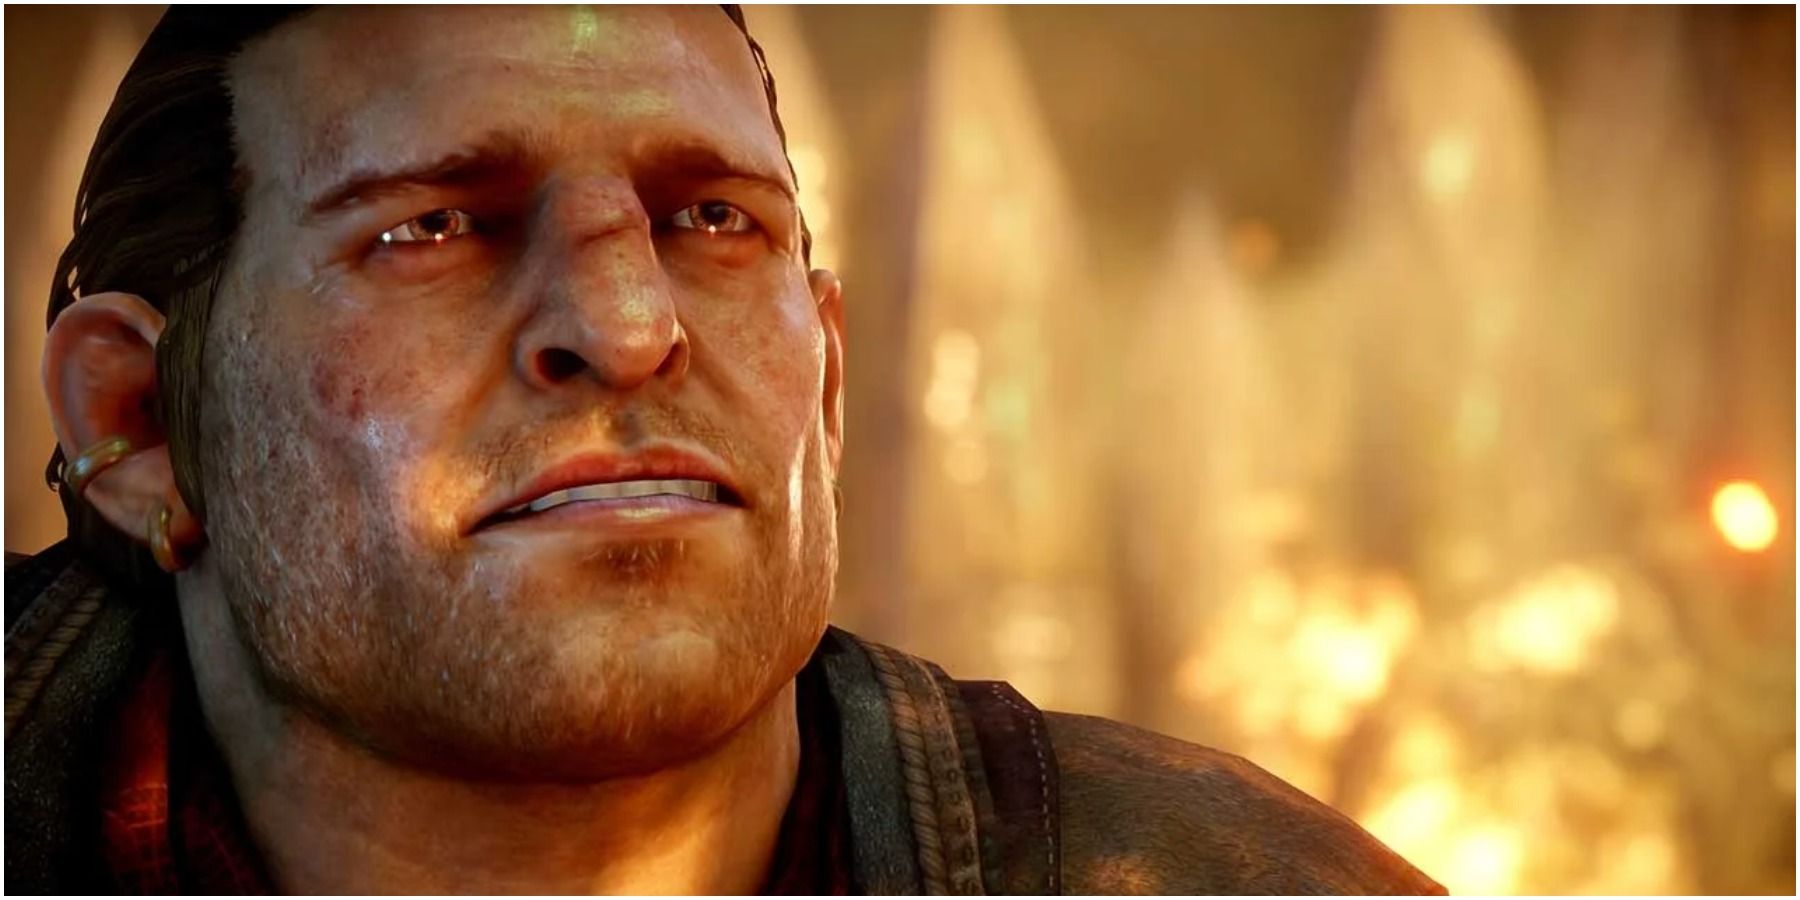 Varric in Inquisition trailer.